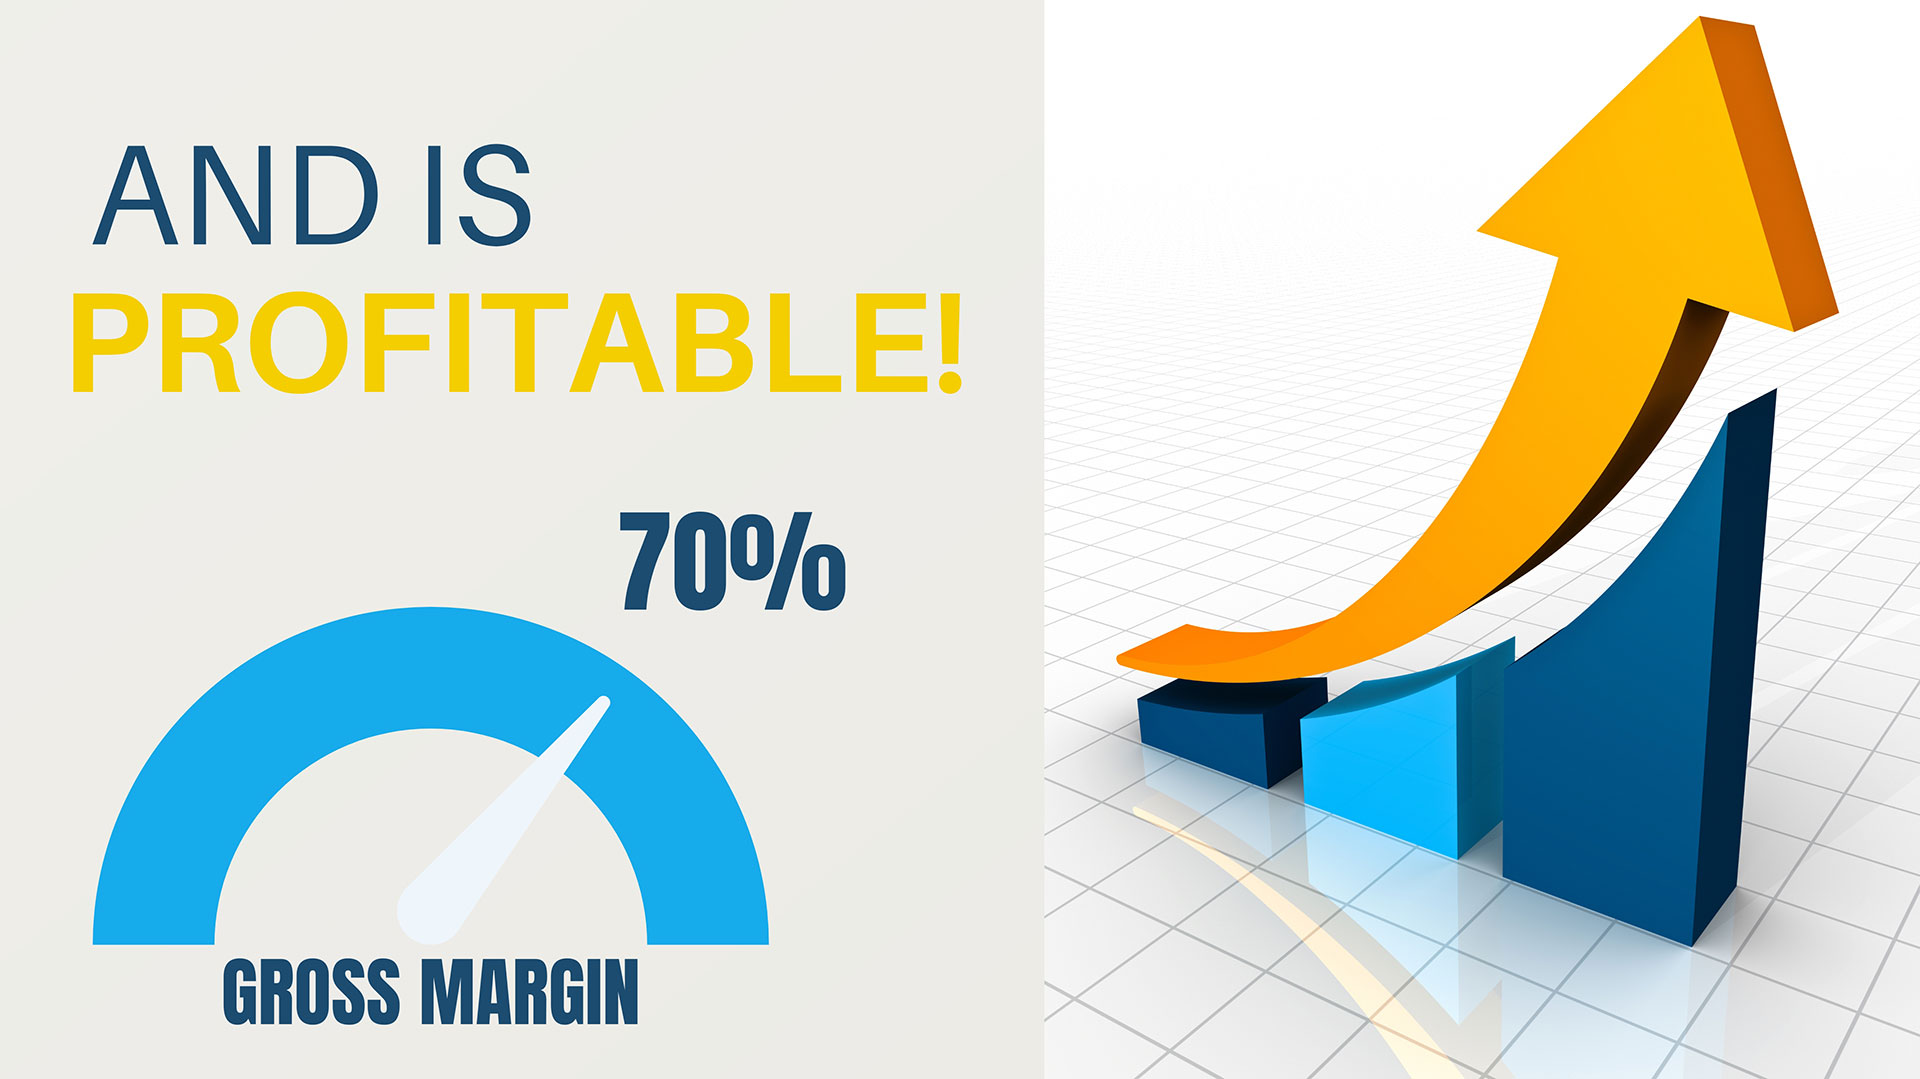 And is profitable ! 70% gross margin